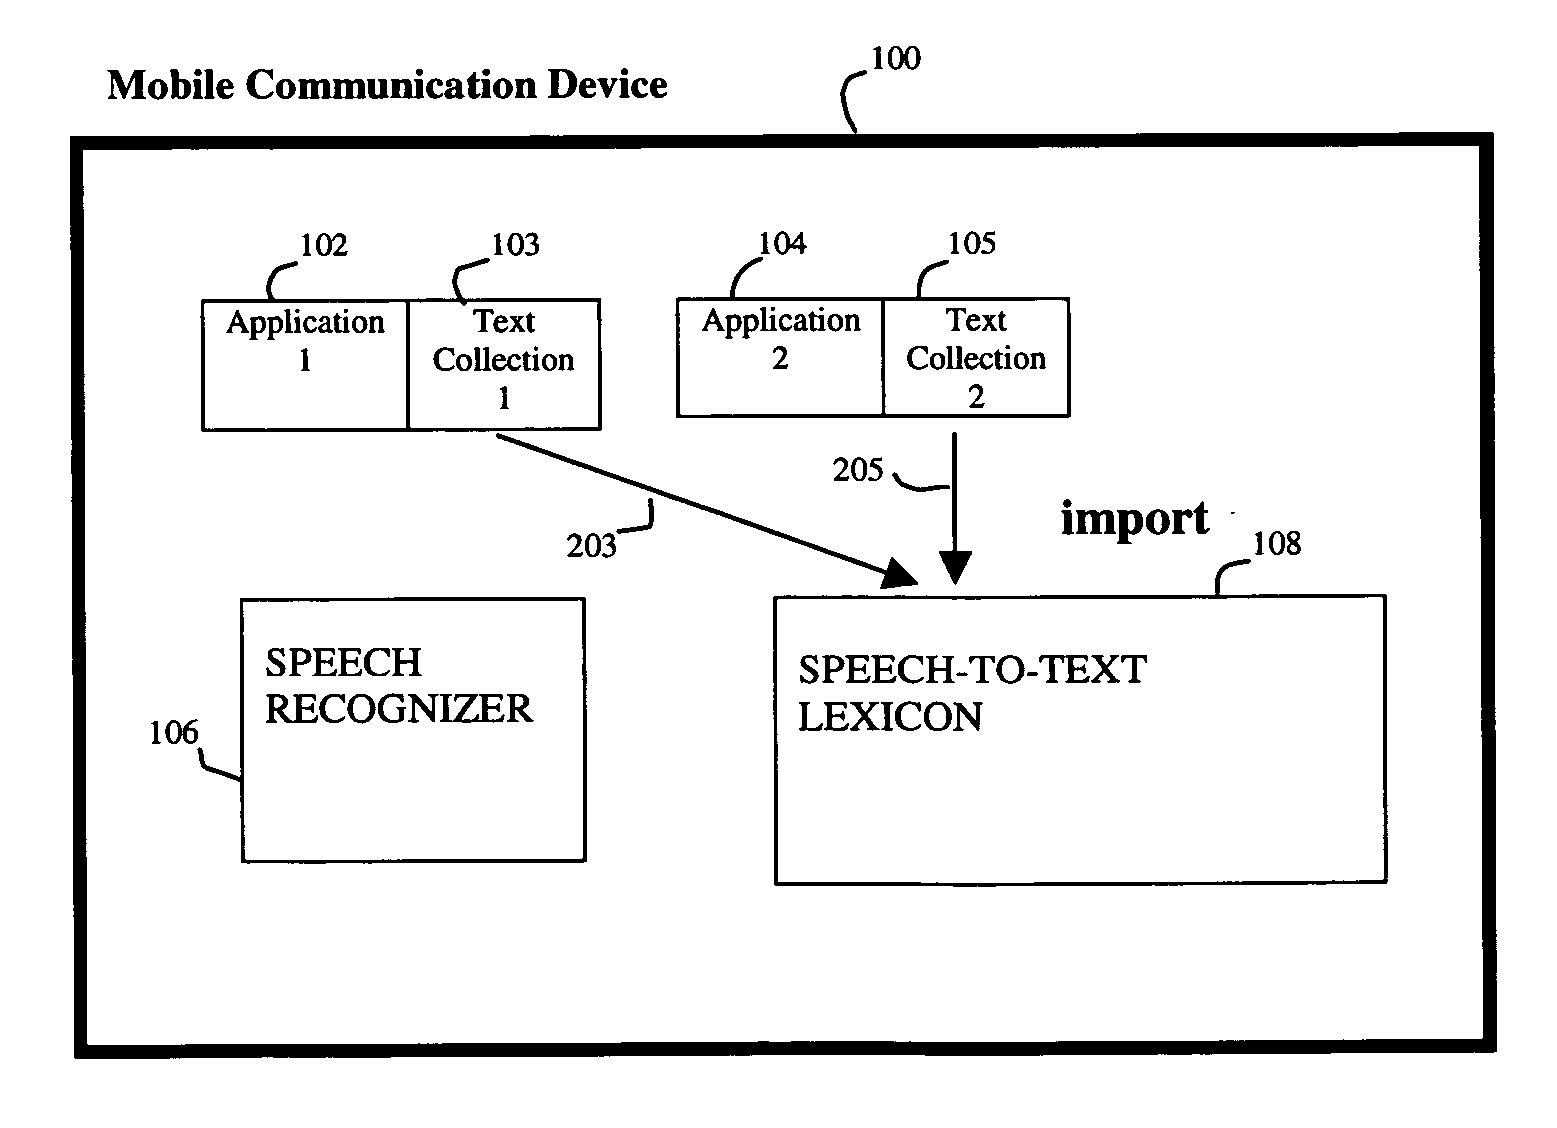 Methods and apparatus for automatically extending the voice vocabulary of mobile communications devices